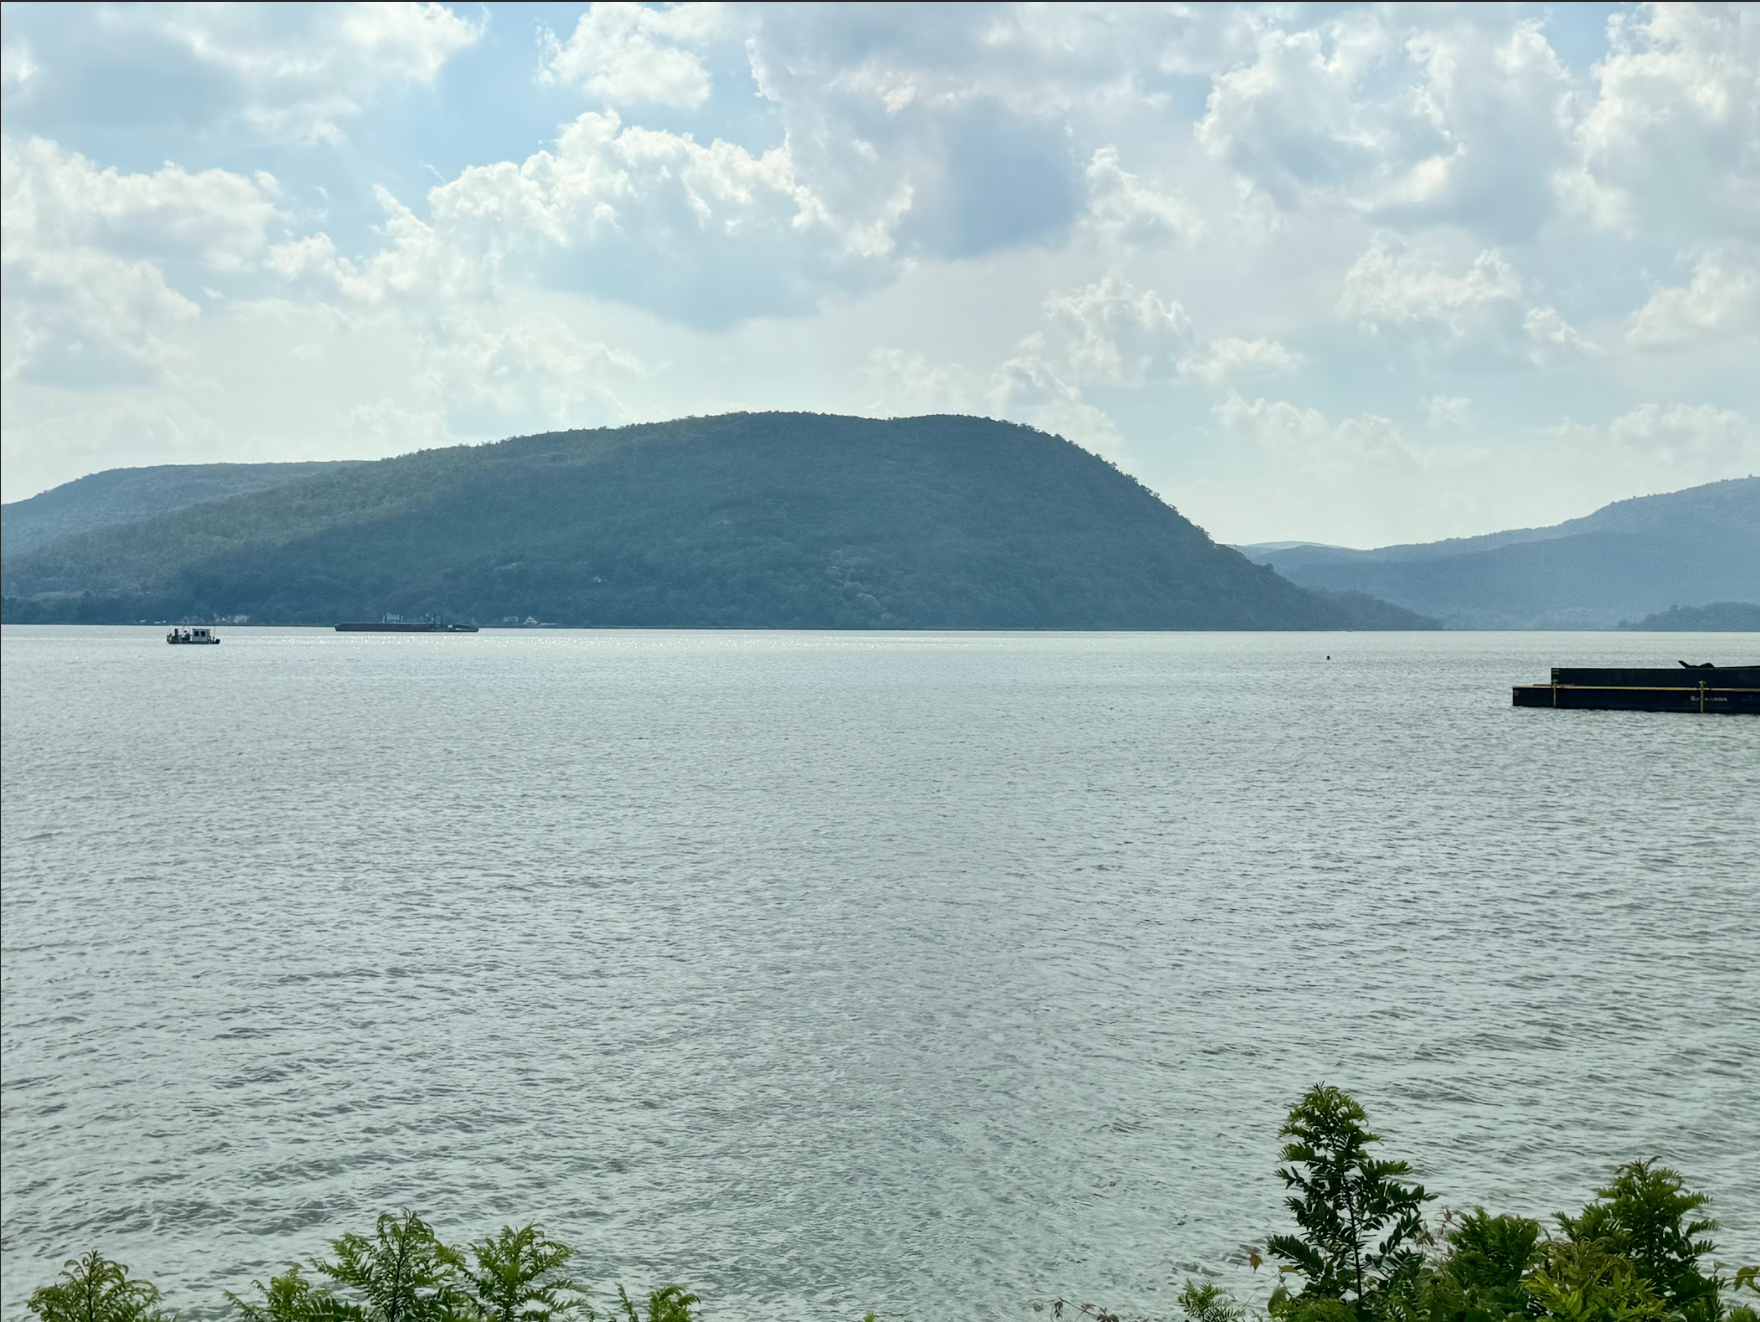 A view of the Hudson from Peekskill. (Photo by Ray DePaul)